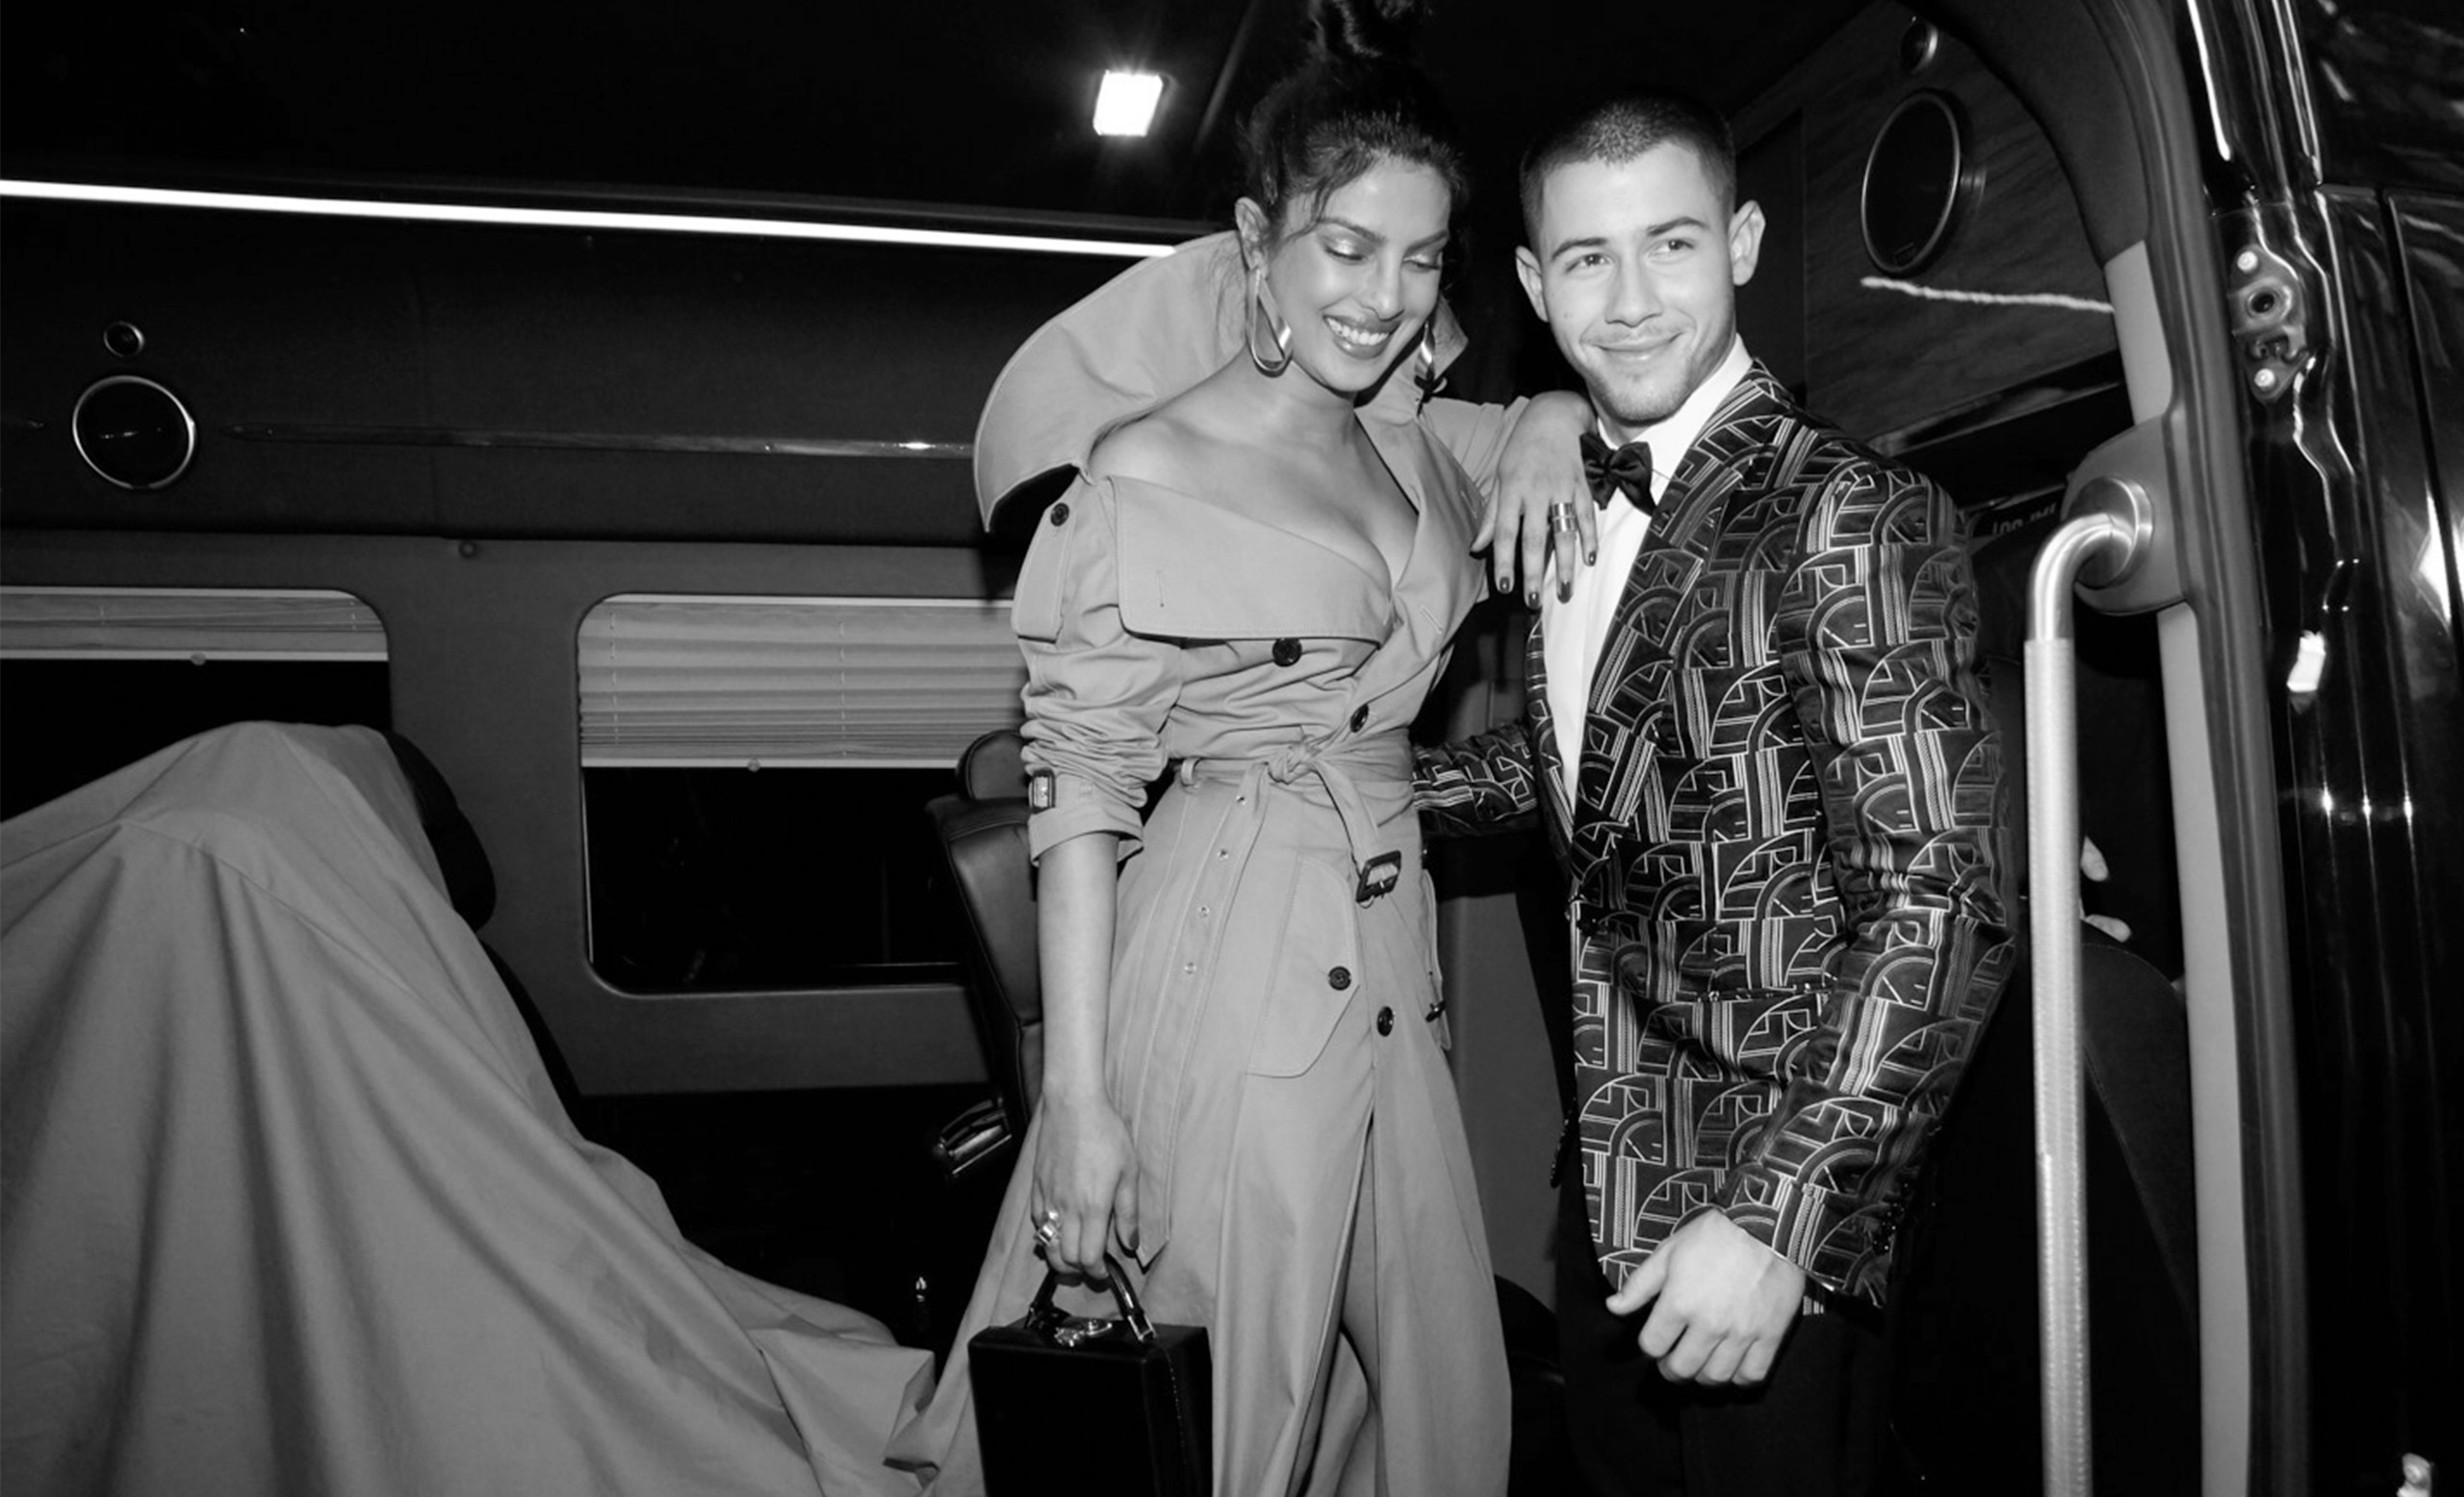 Priyanka and Nick shared the spotlight for the first time as guests of Ralph Lauren at the Met Gala in May 2017—just a week after their first date and a few months of flirtatious texting